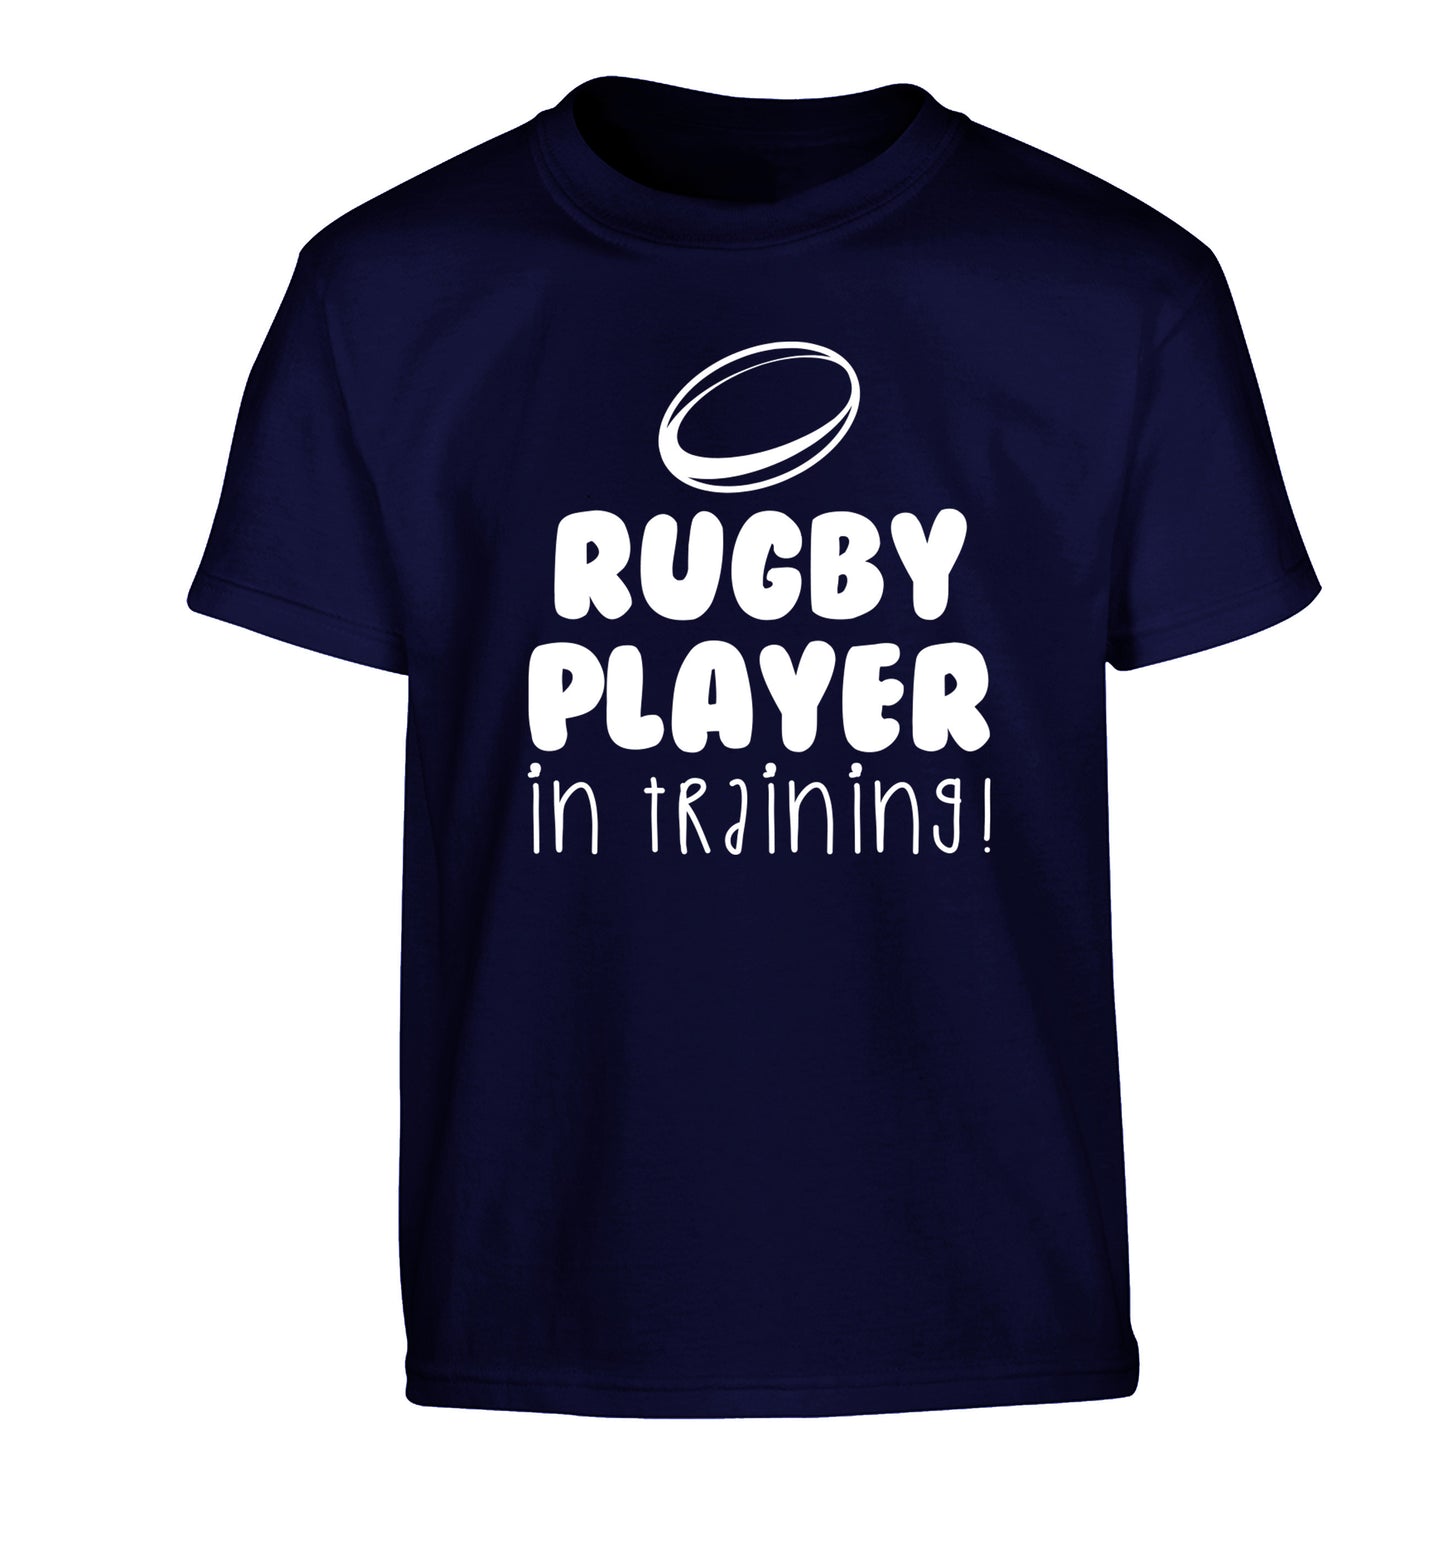 Rugby player in training Children's navy Tshirt 12-14 Years